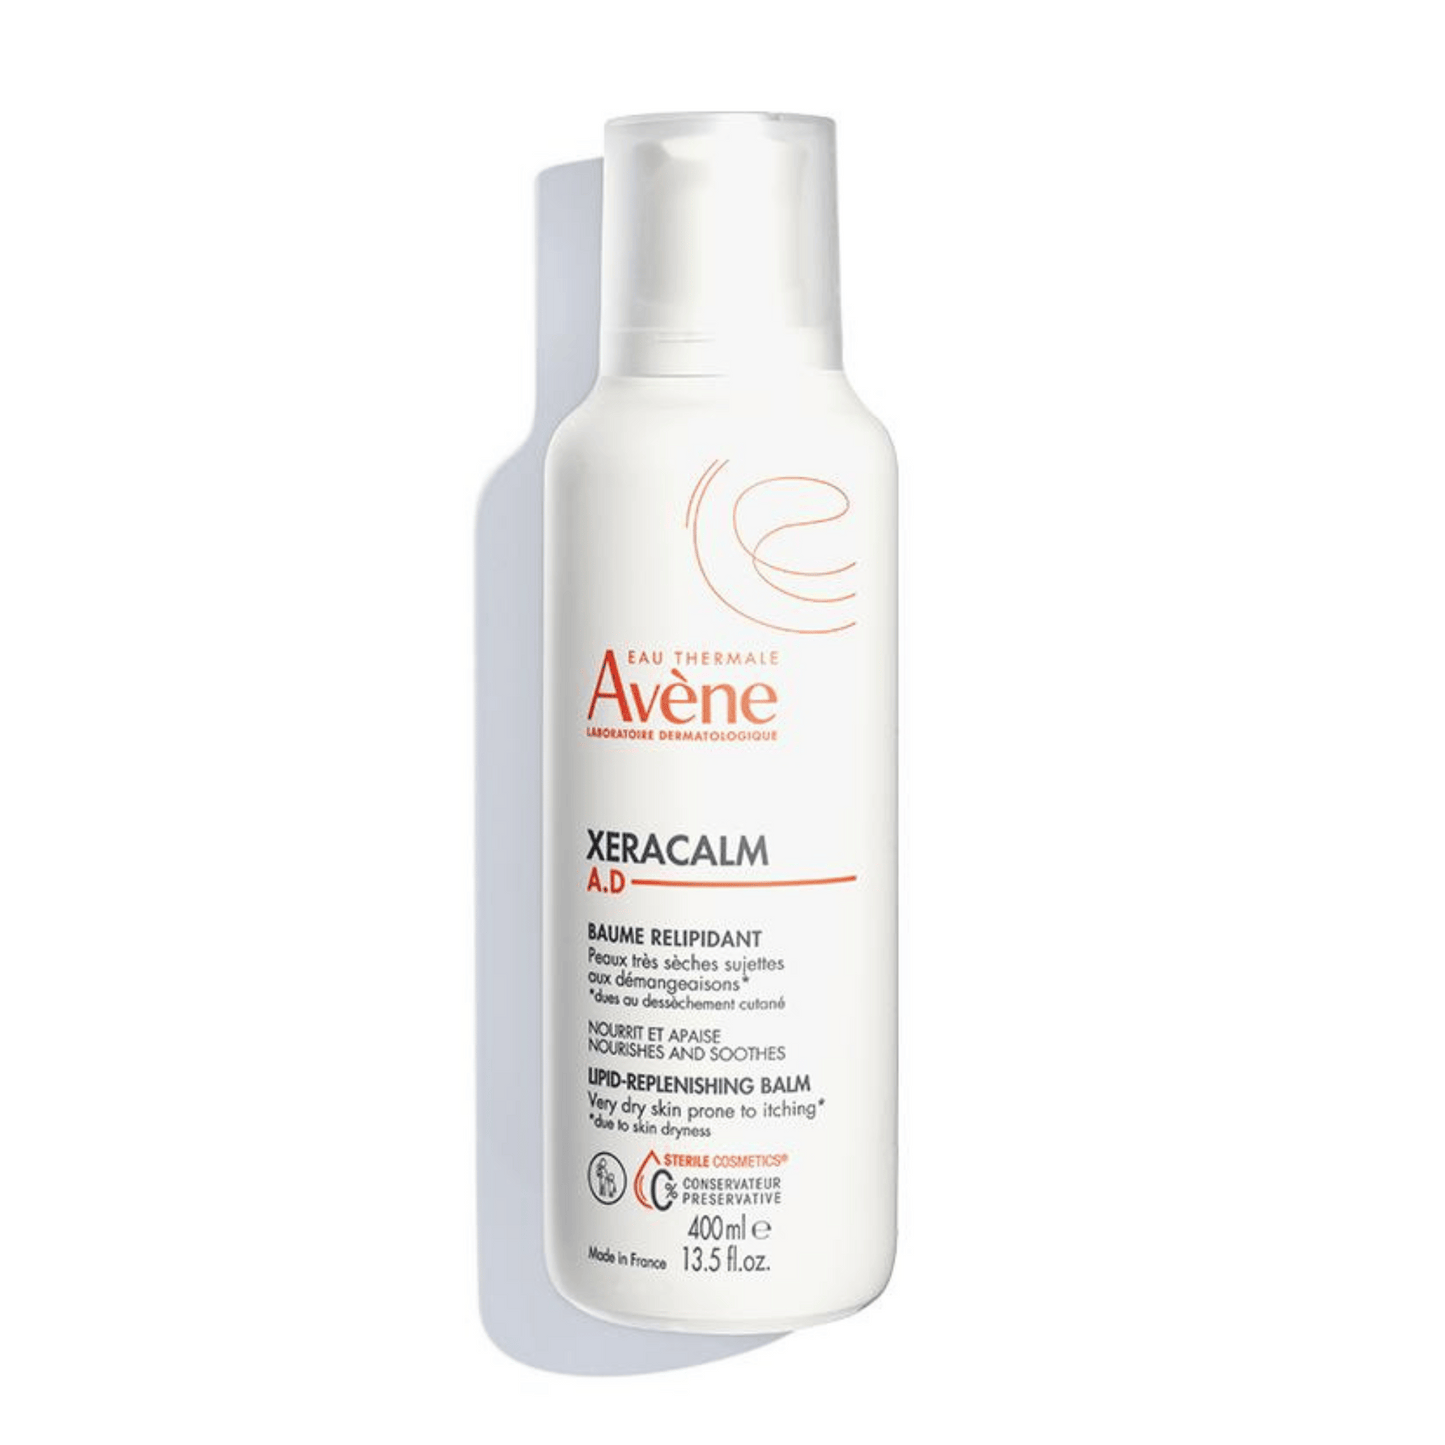 Primary Image of XeraCalm A.D Lipid-Replenishing Balm